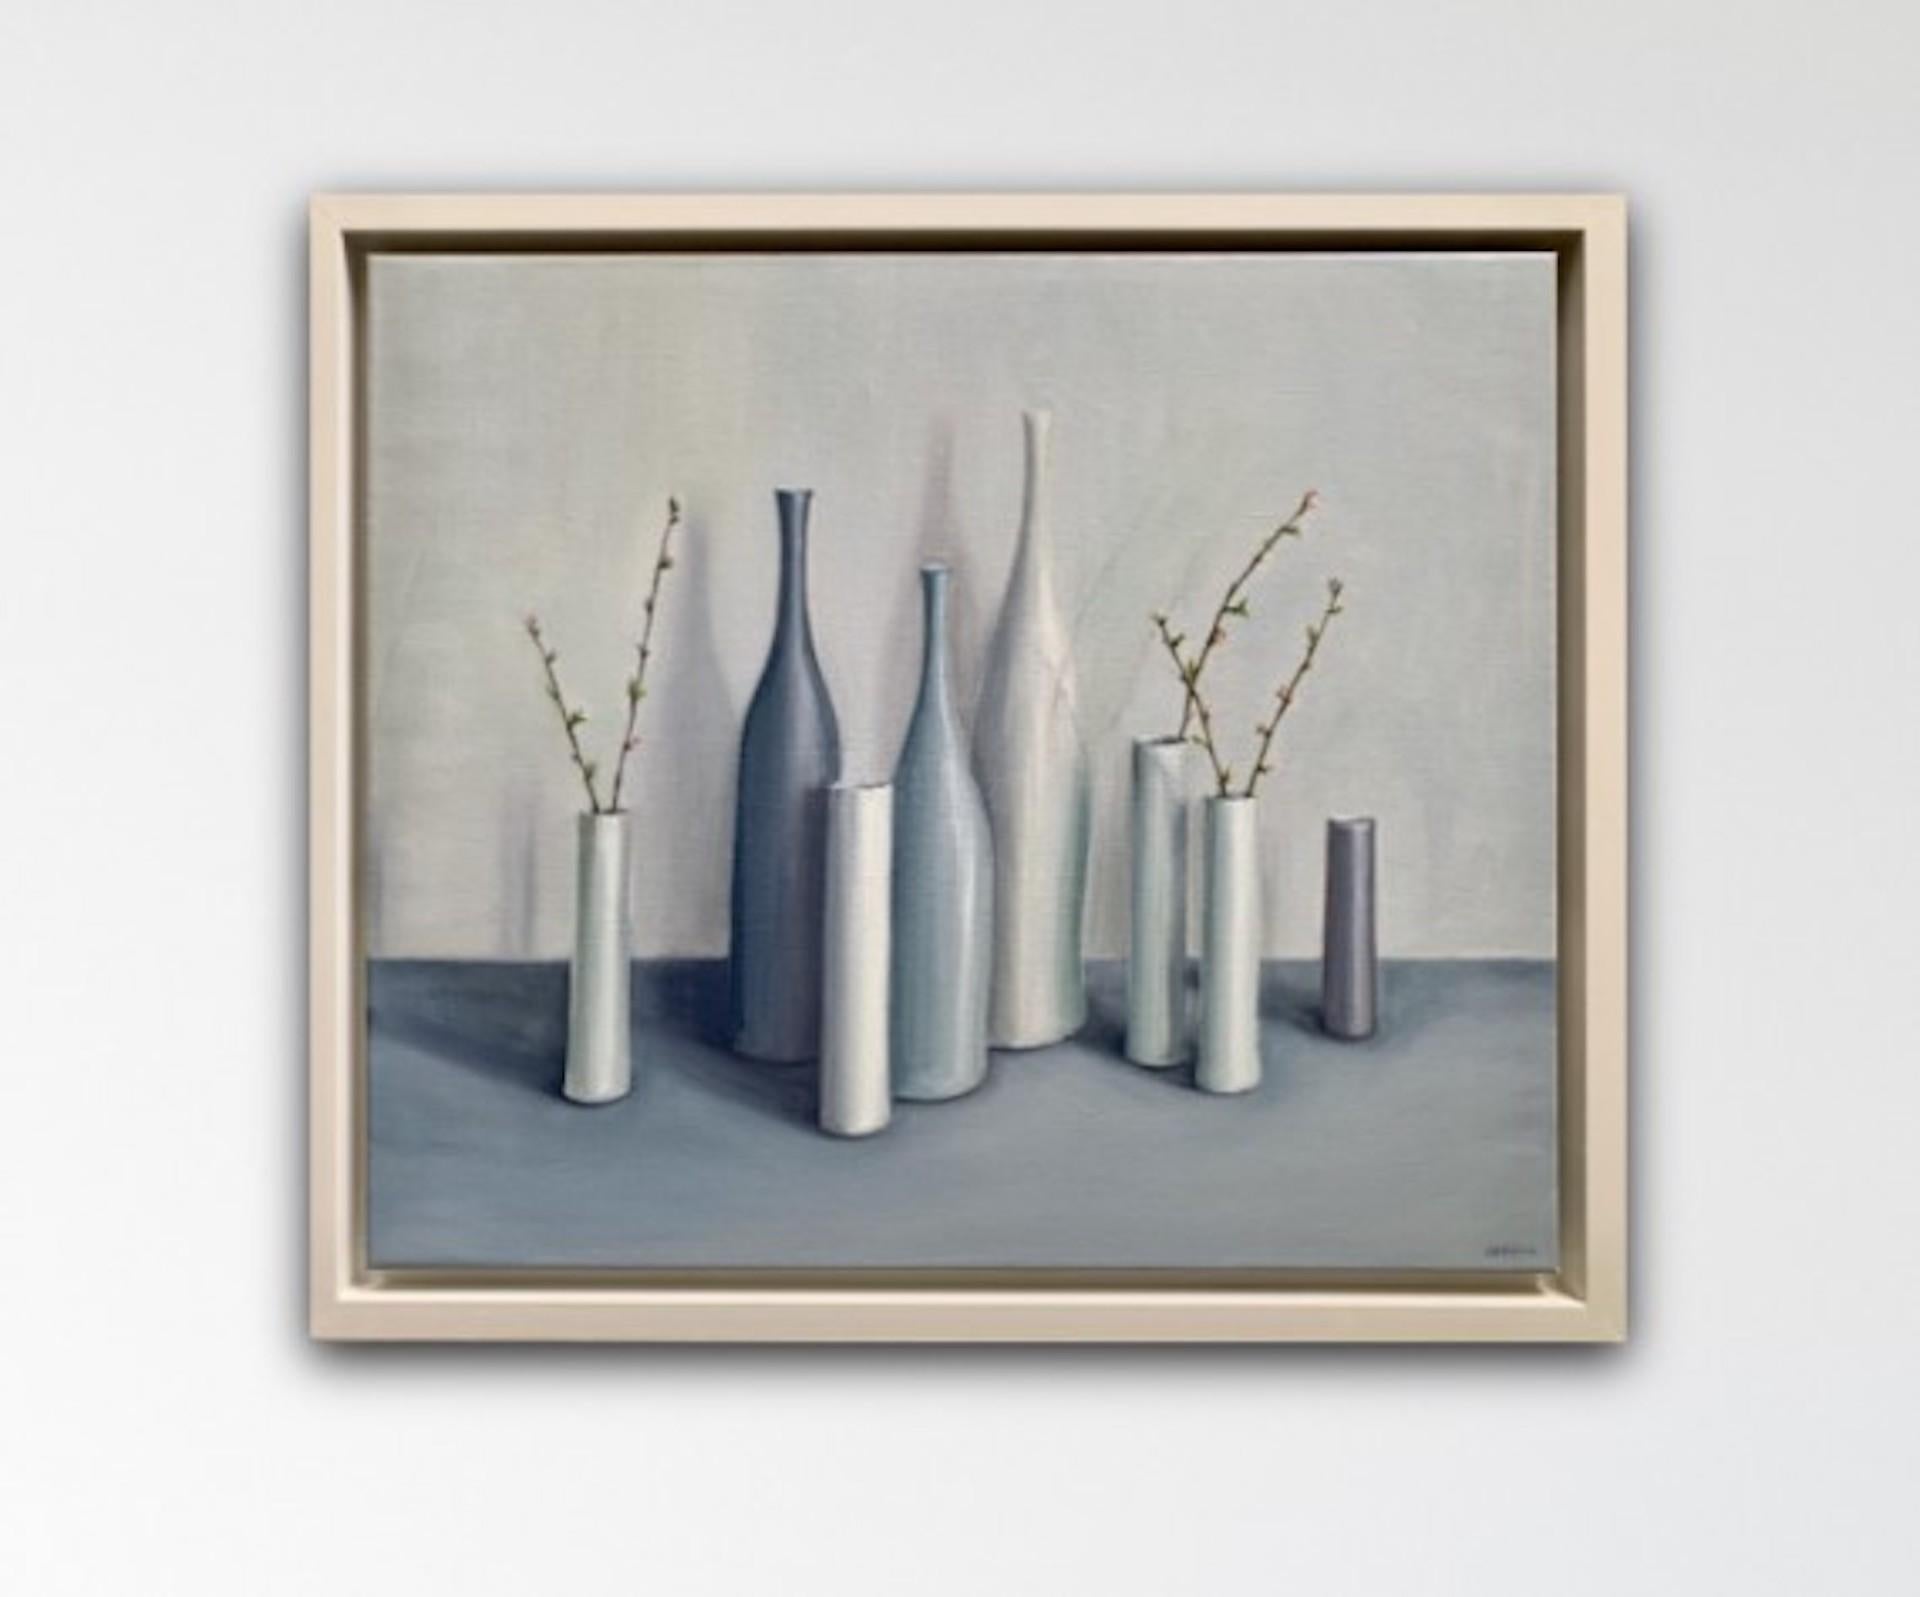 Jonquil Williamson, Bottles and Cylinders with Cherry Blossom Twigs 5